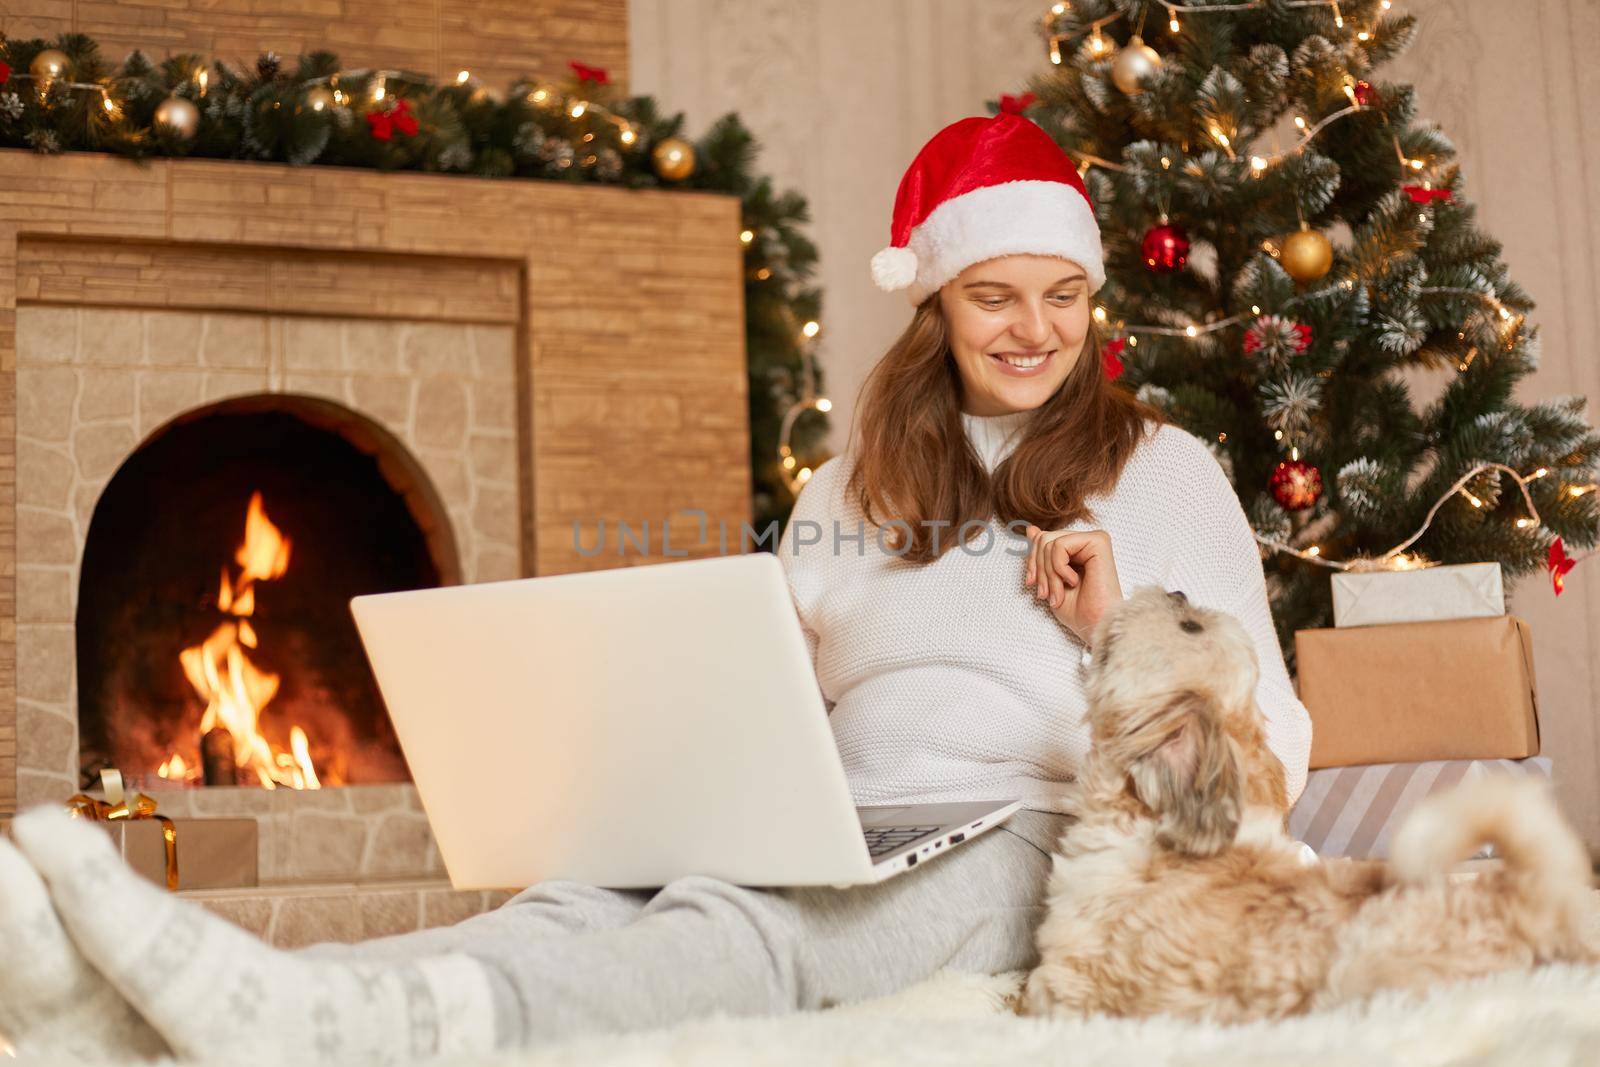 Charming woman sitting on floor with laptop, looks at her pet who sits near her, happy female wears red hat and casual sweater, lady with pekingese dog pose in festive Christmas room near fireplace.